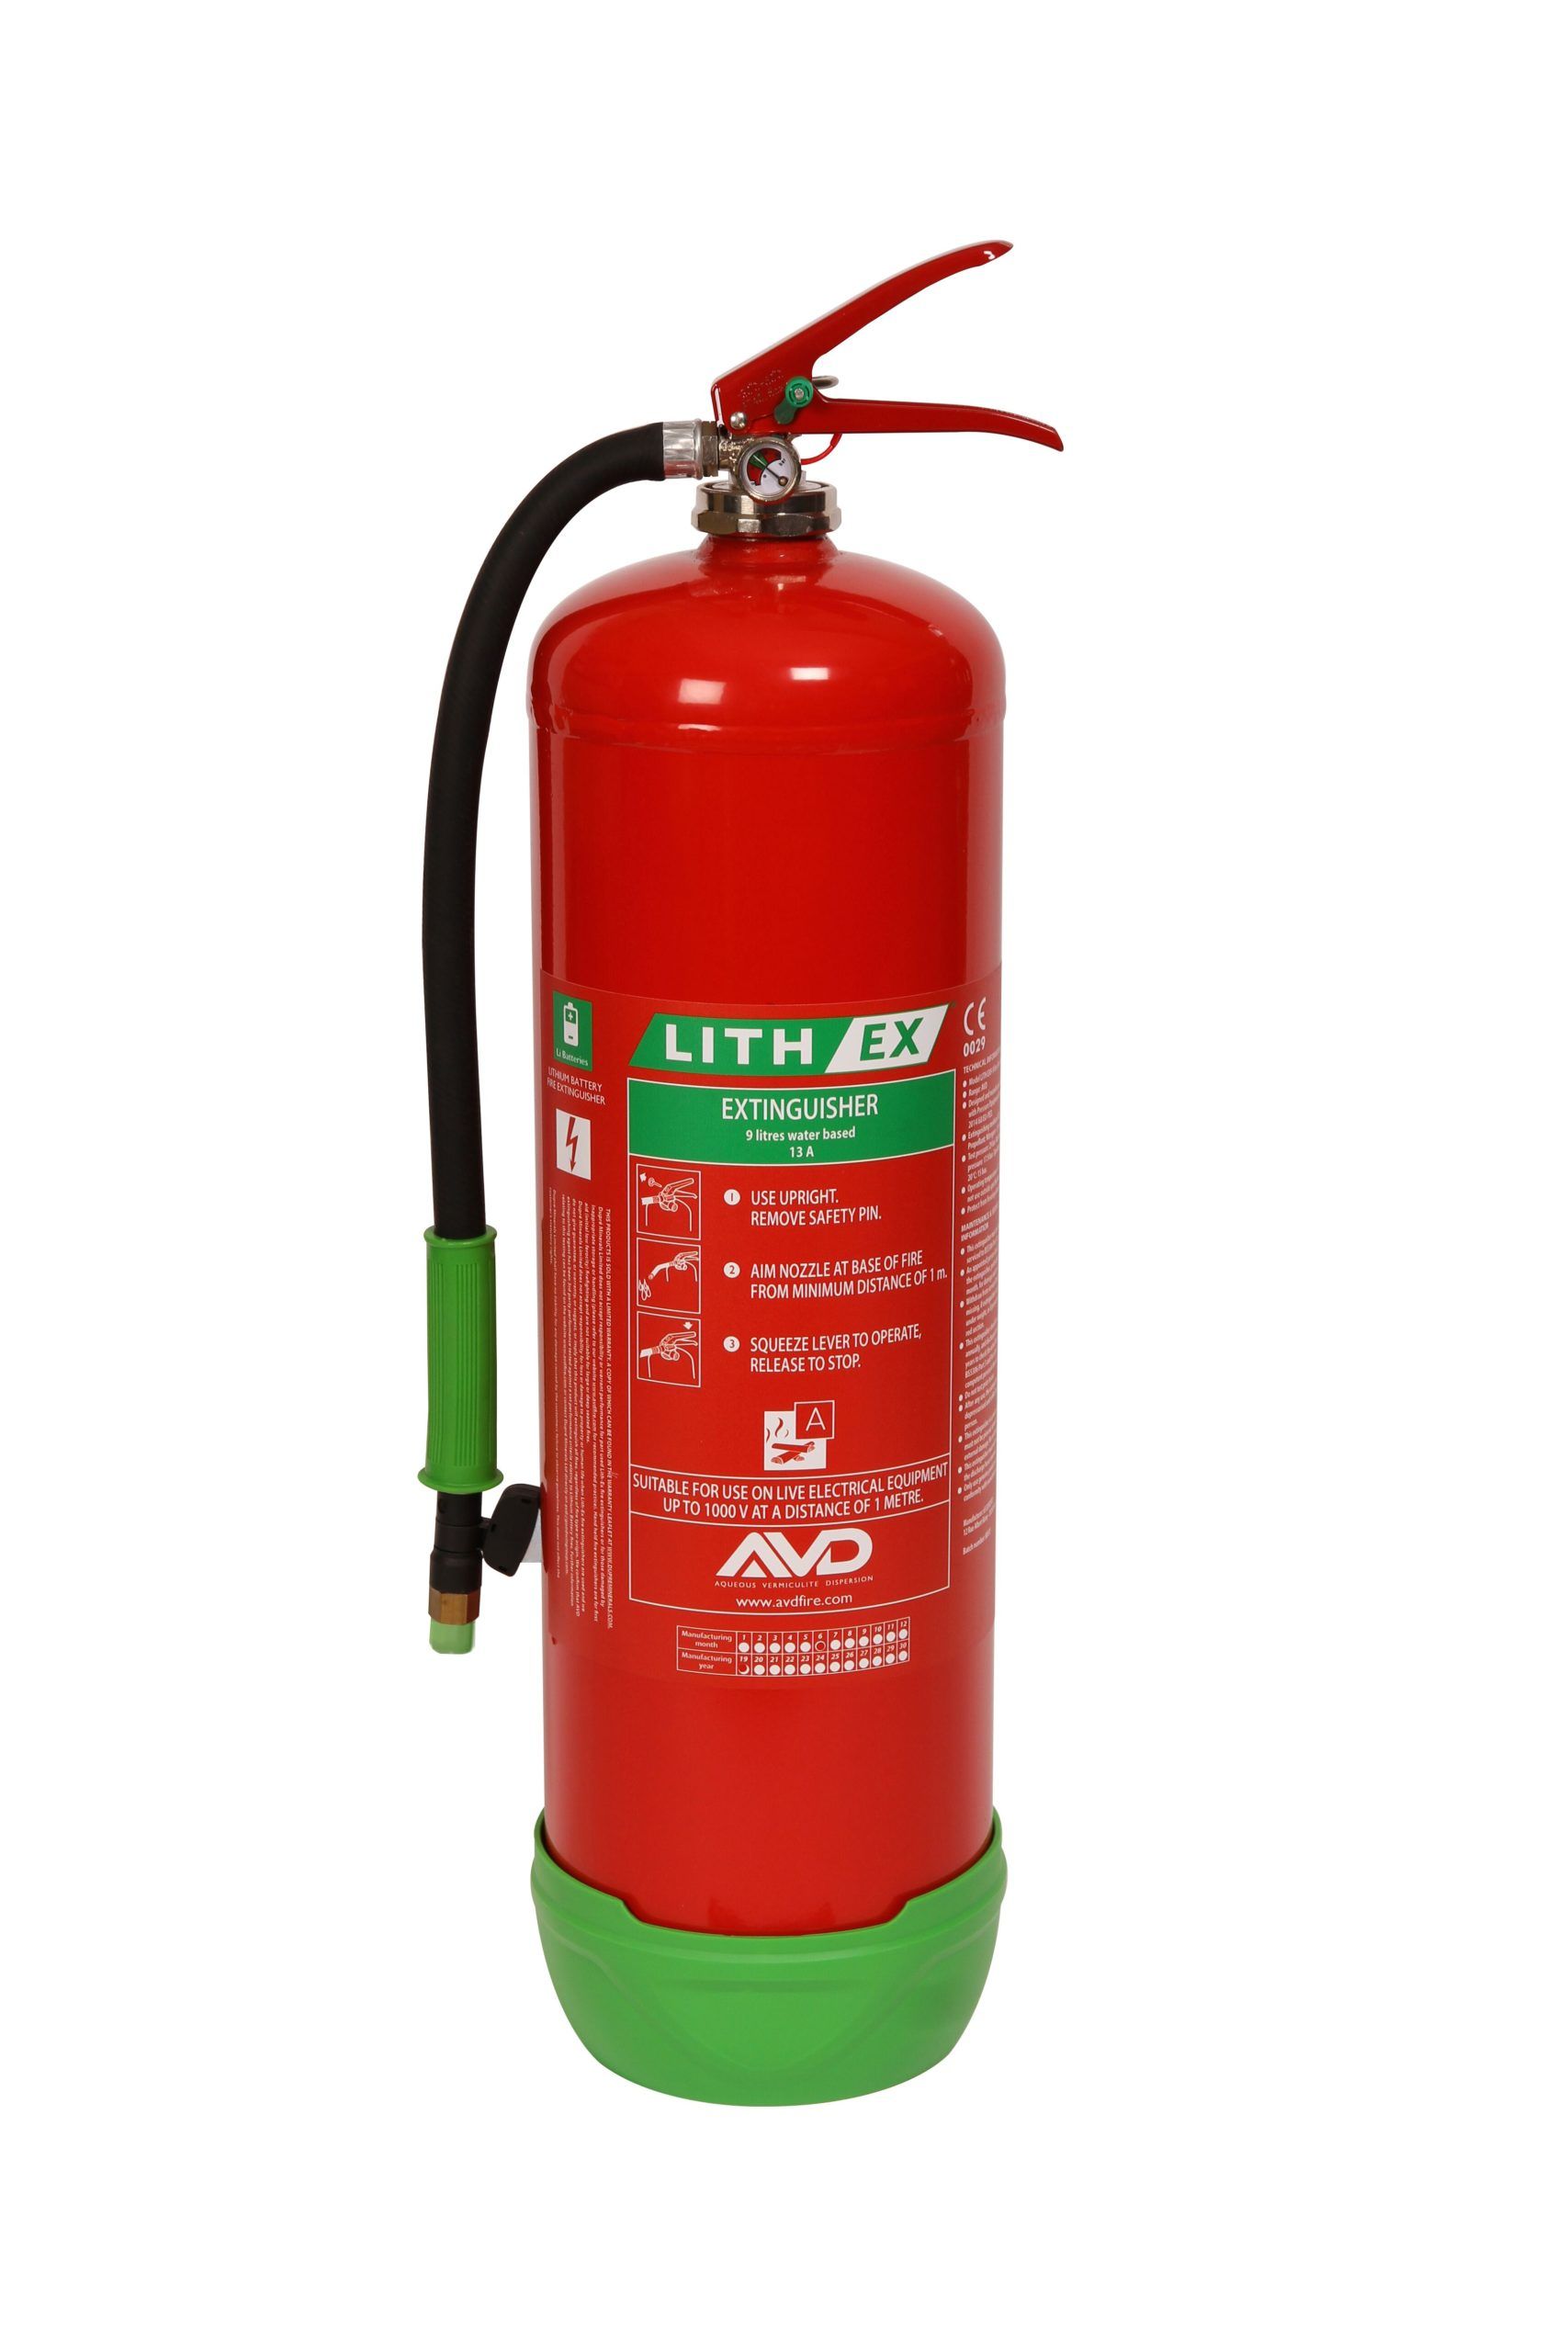 Lith-Ex 9 Litre Fire Extinguisher - AVD Fire